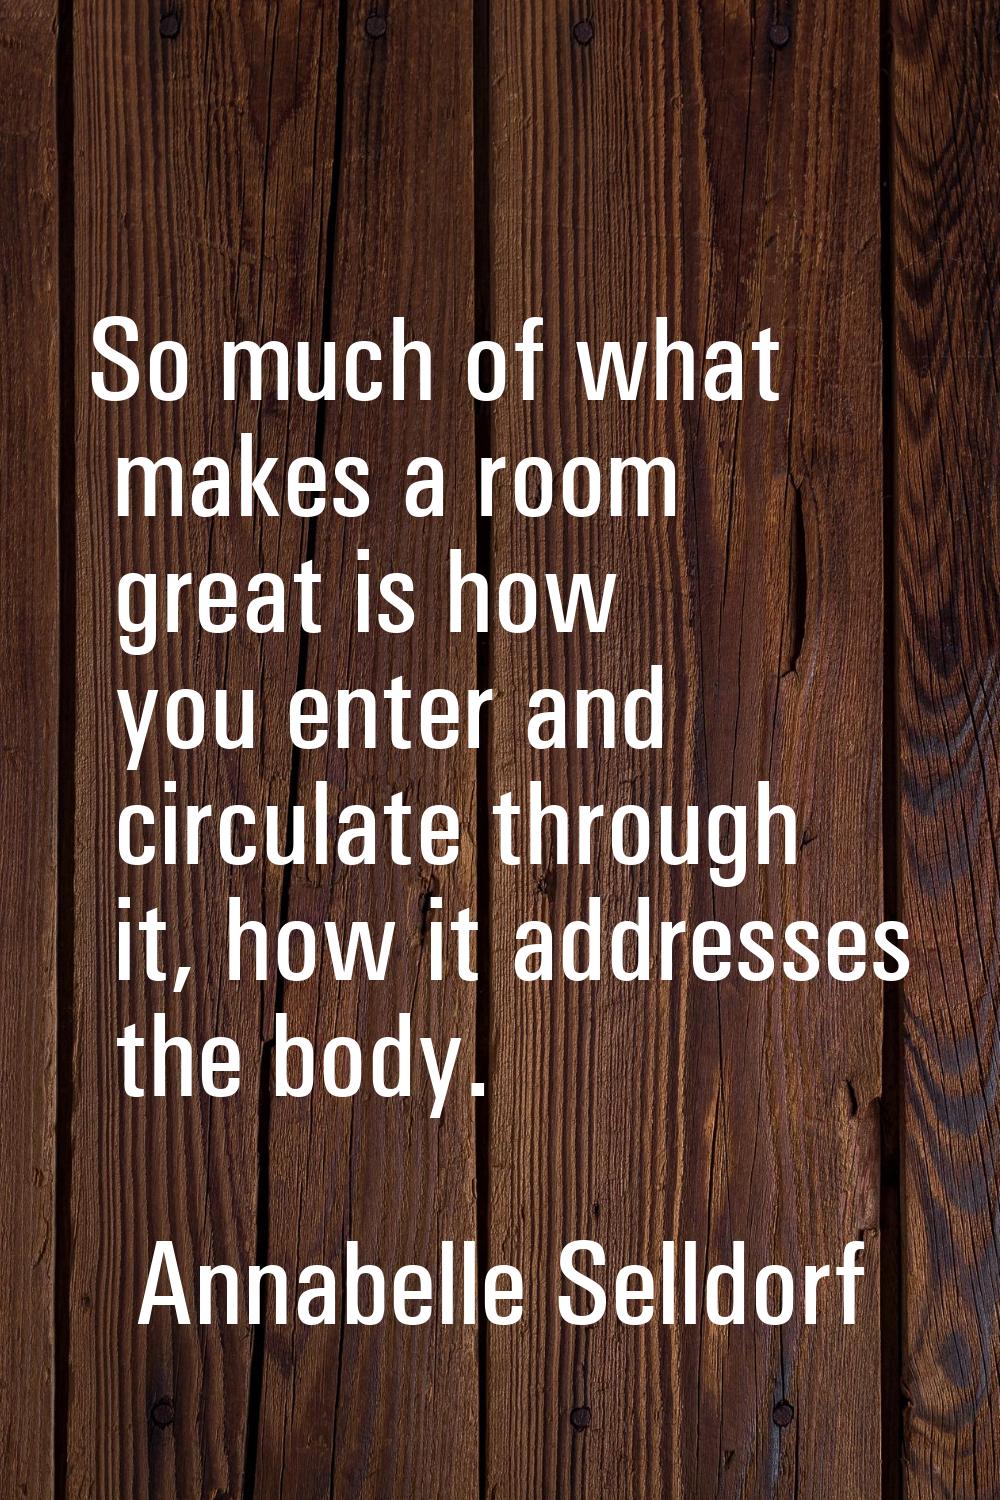 So much of what makes a room great is how you enter and circulate through it, how it addresses the 